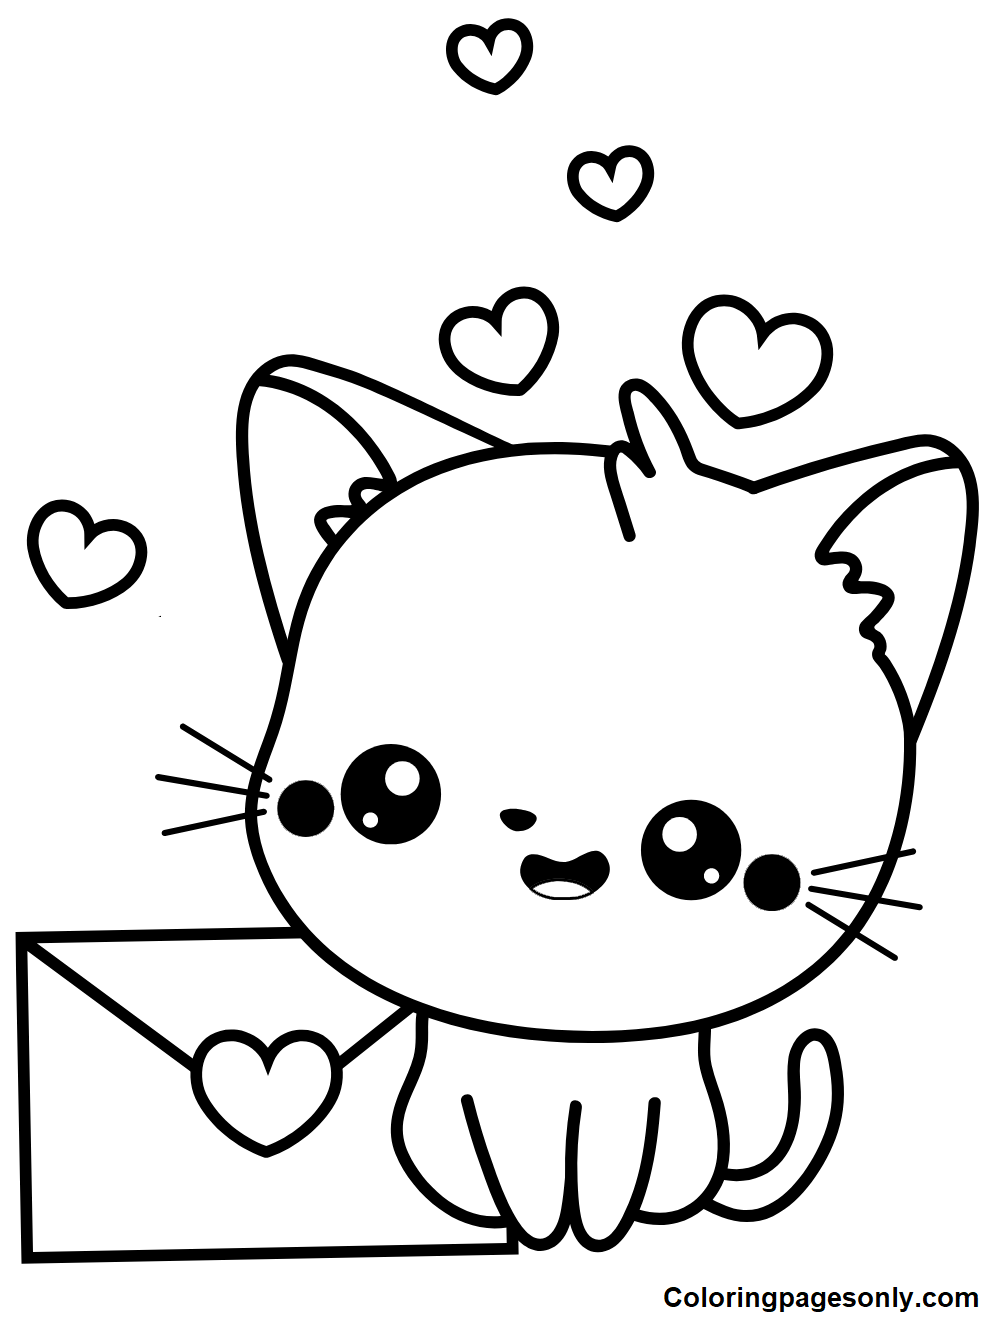 Kawaii Cat Valentine’s Day Coloring Pages